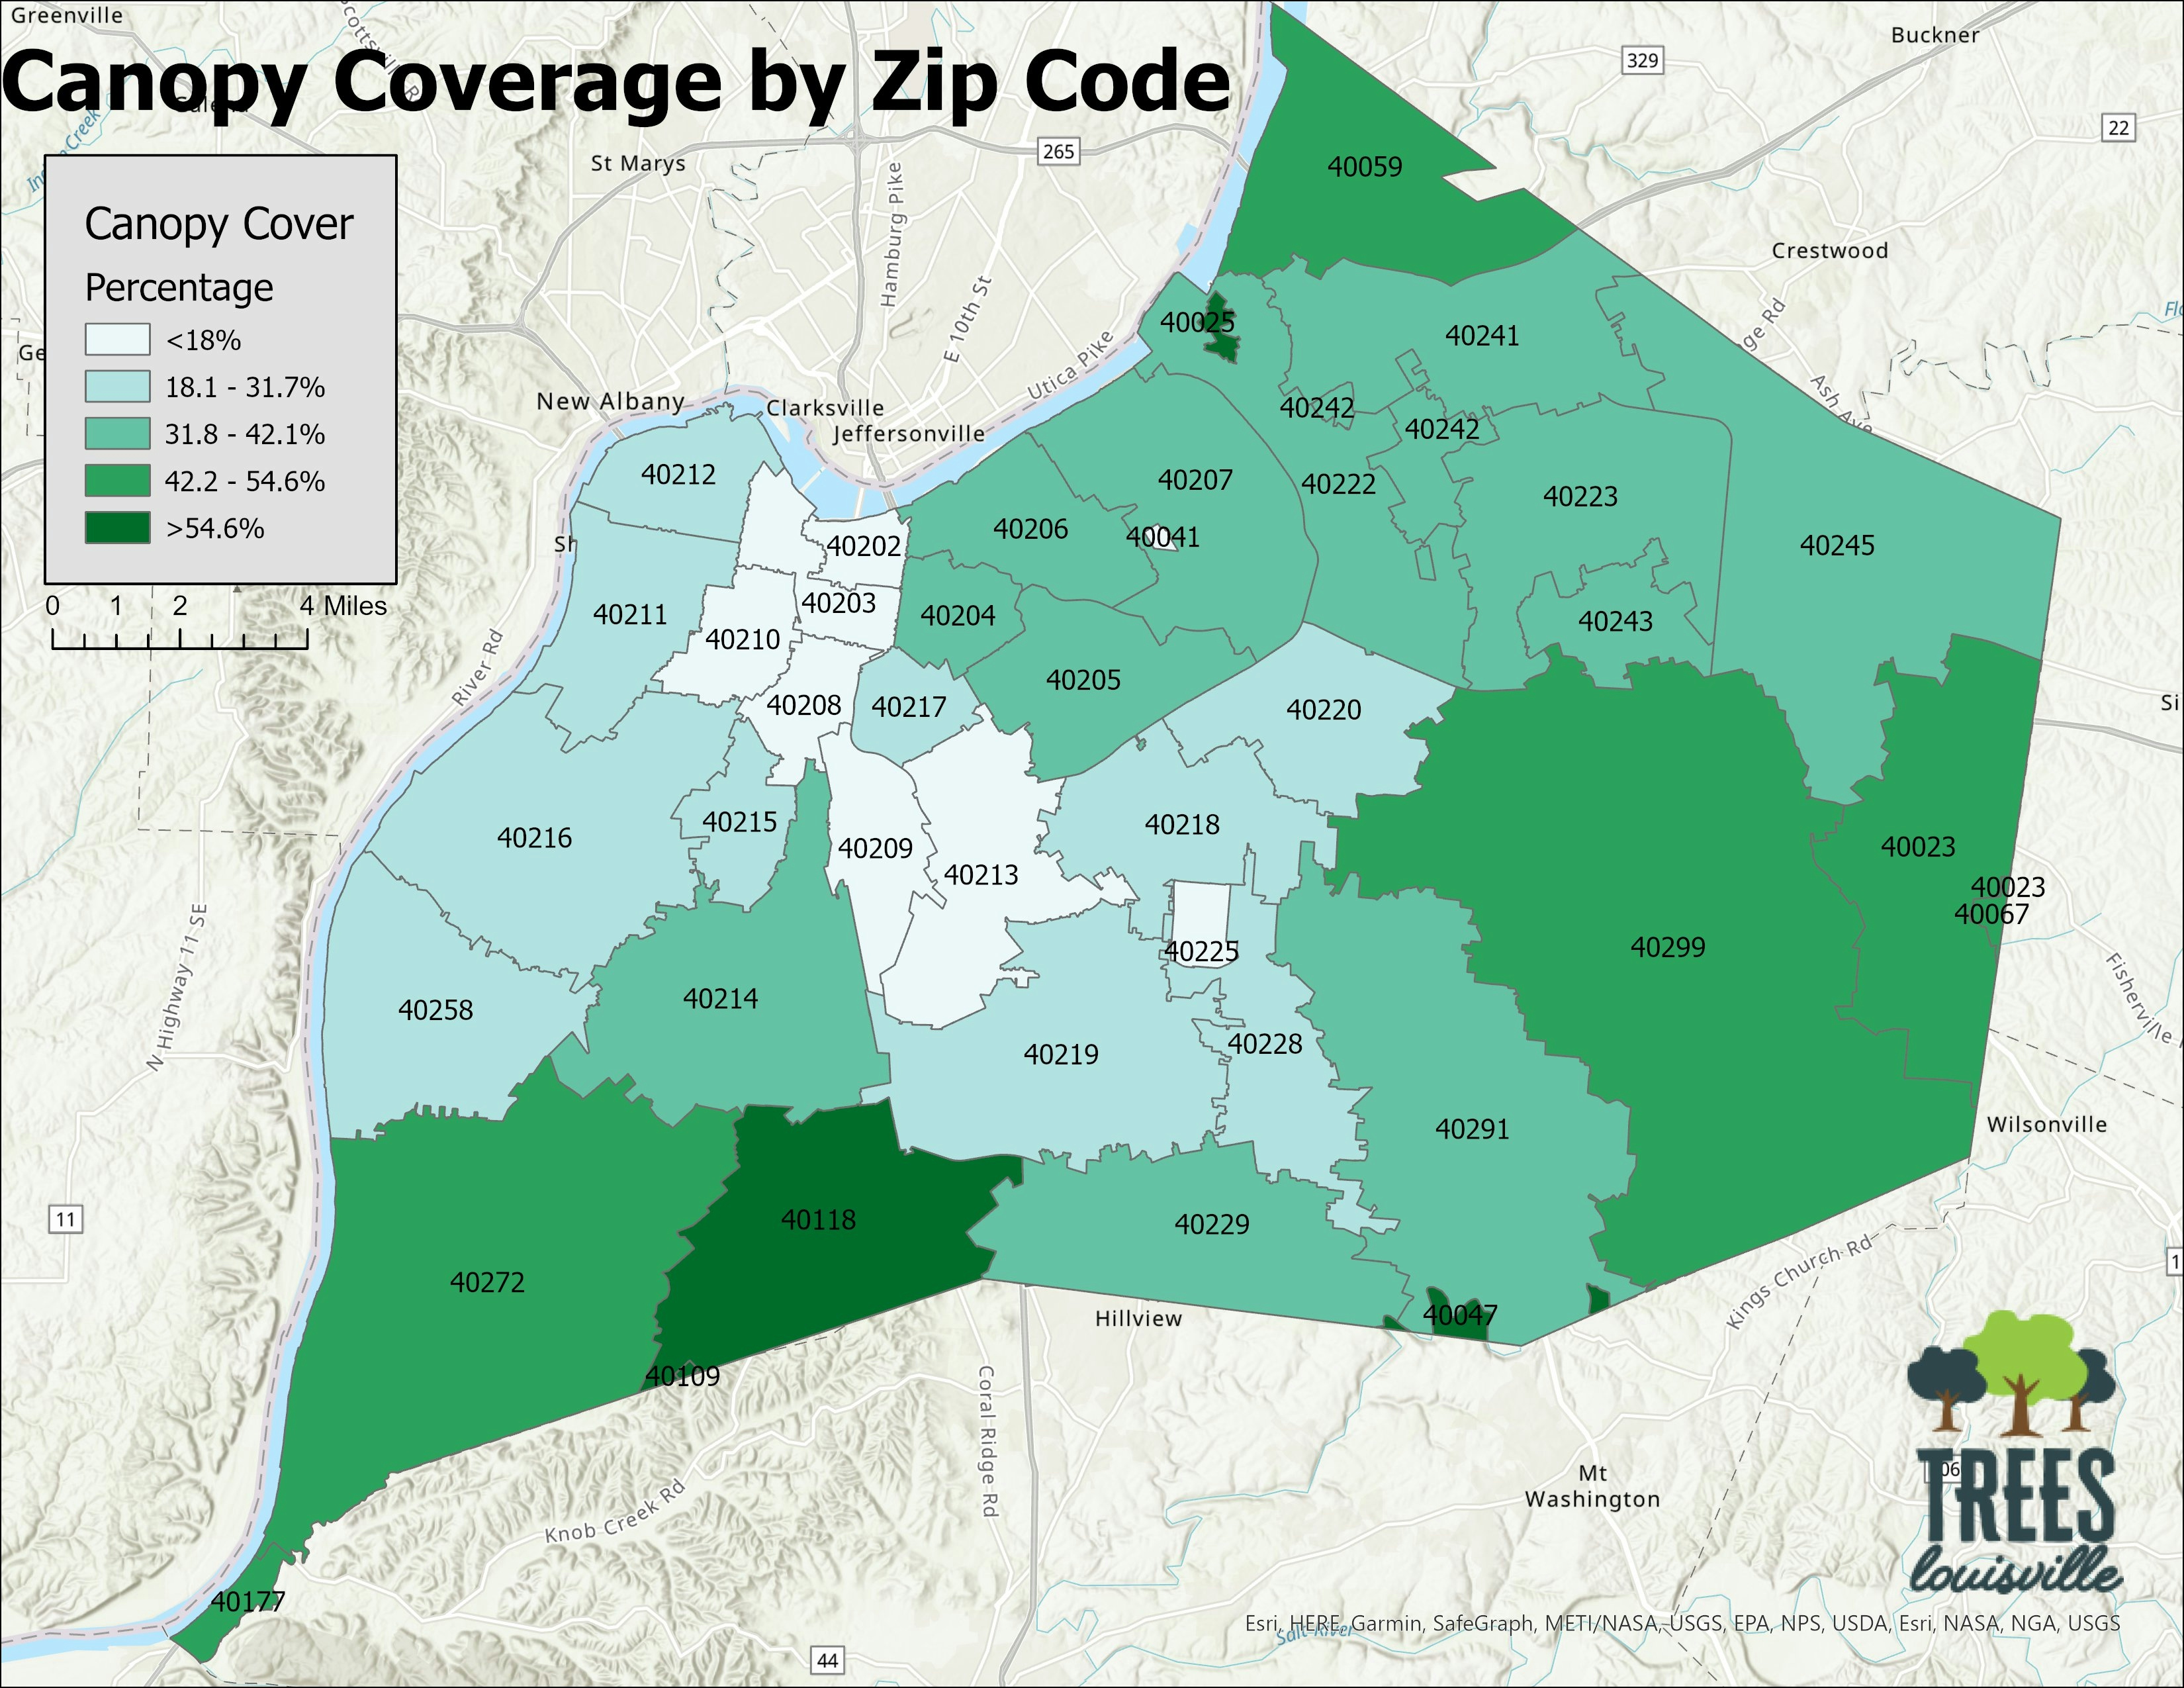 Canopy Cover by Zip Code